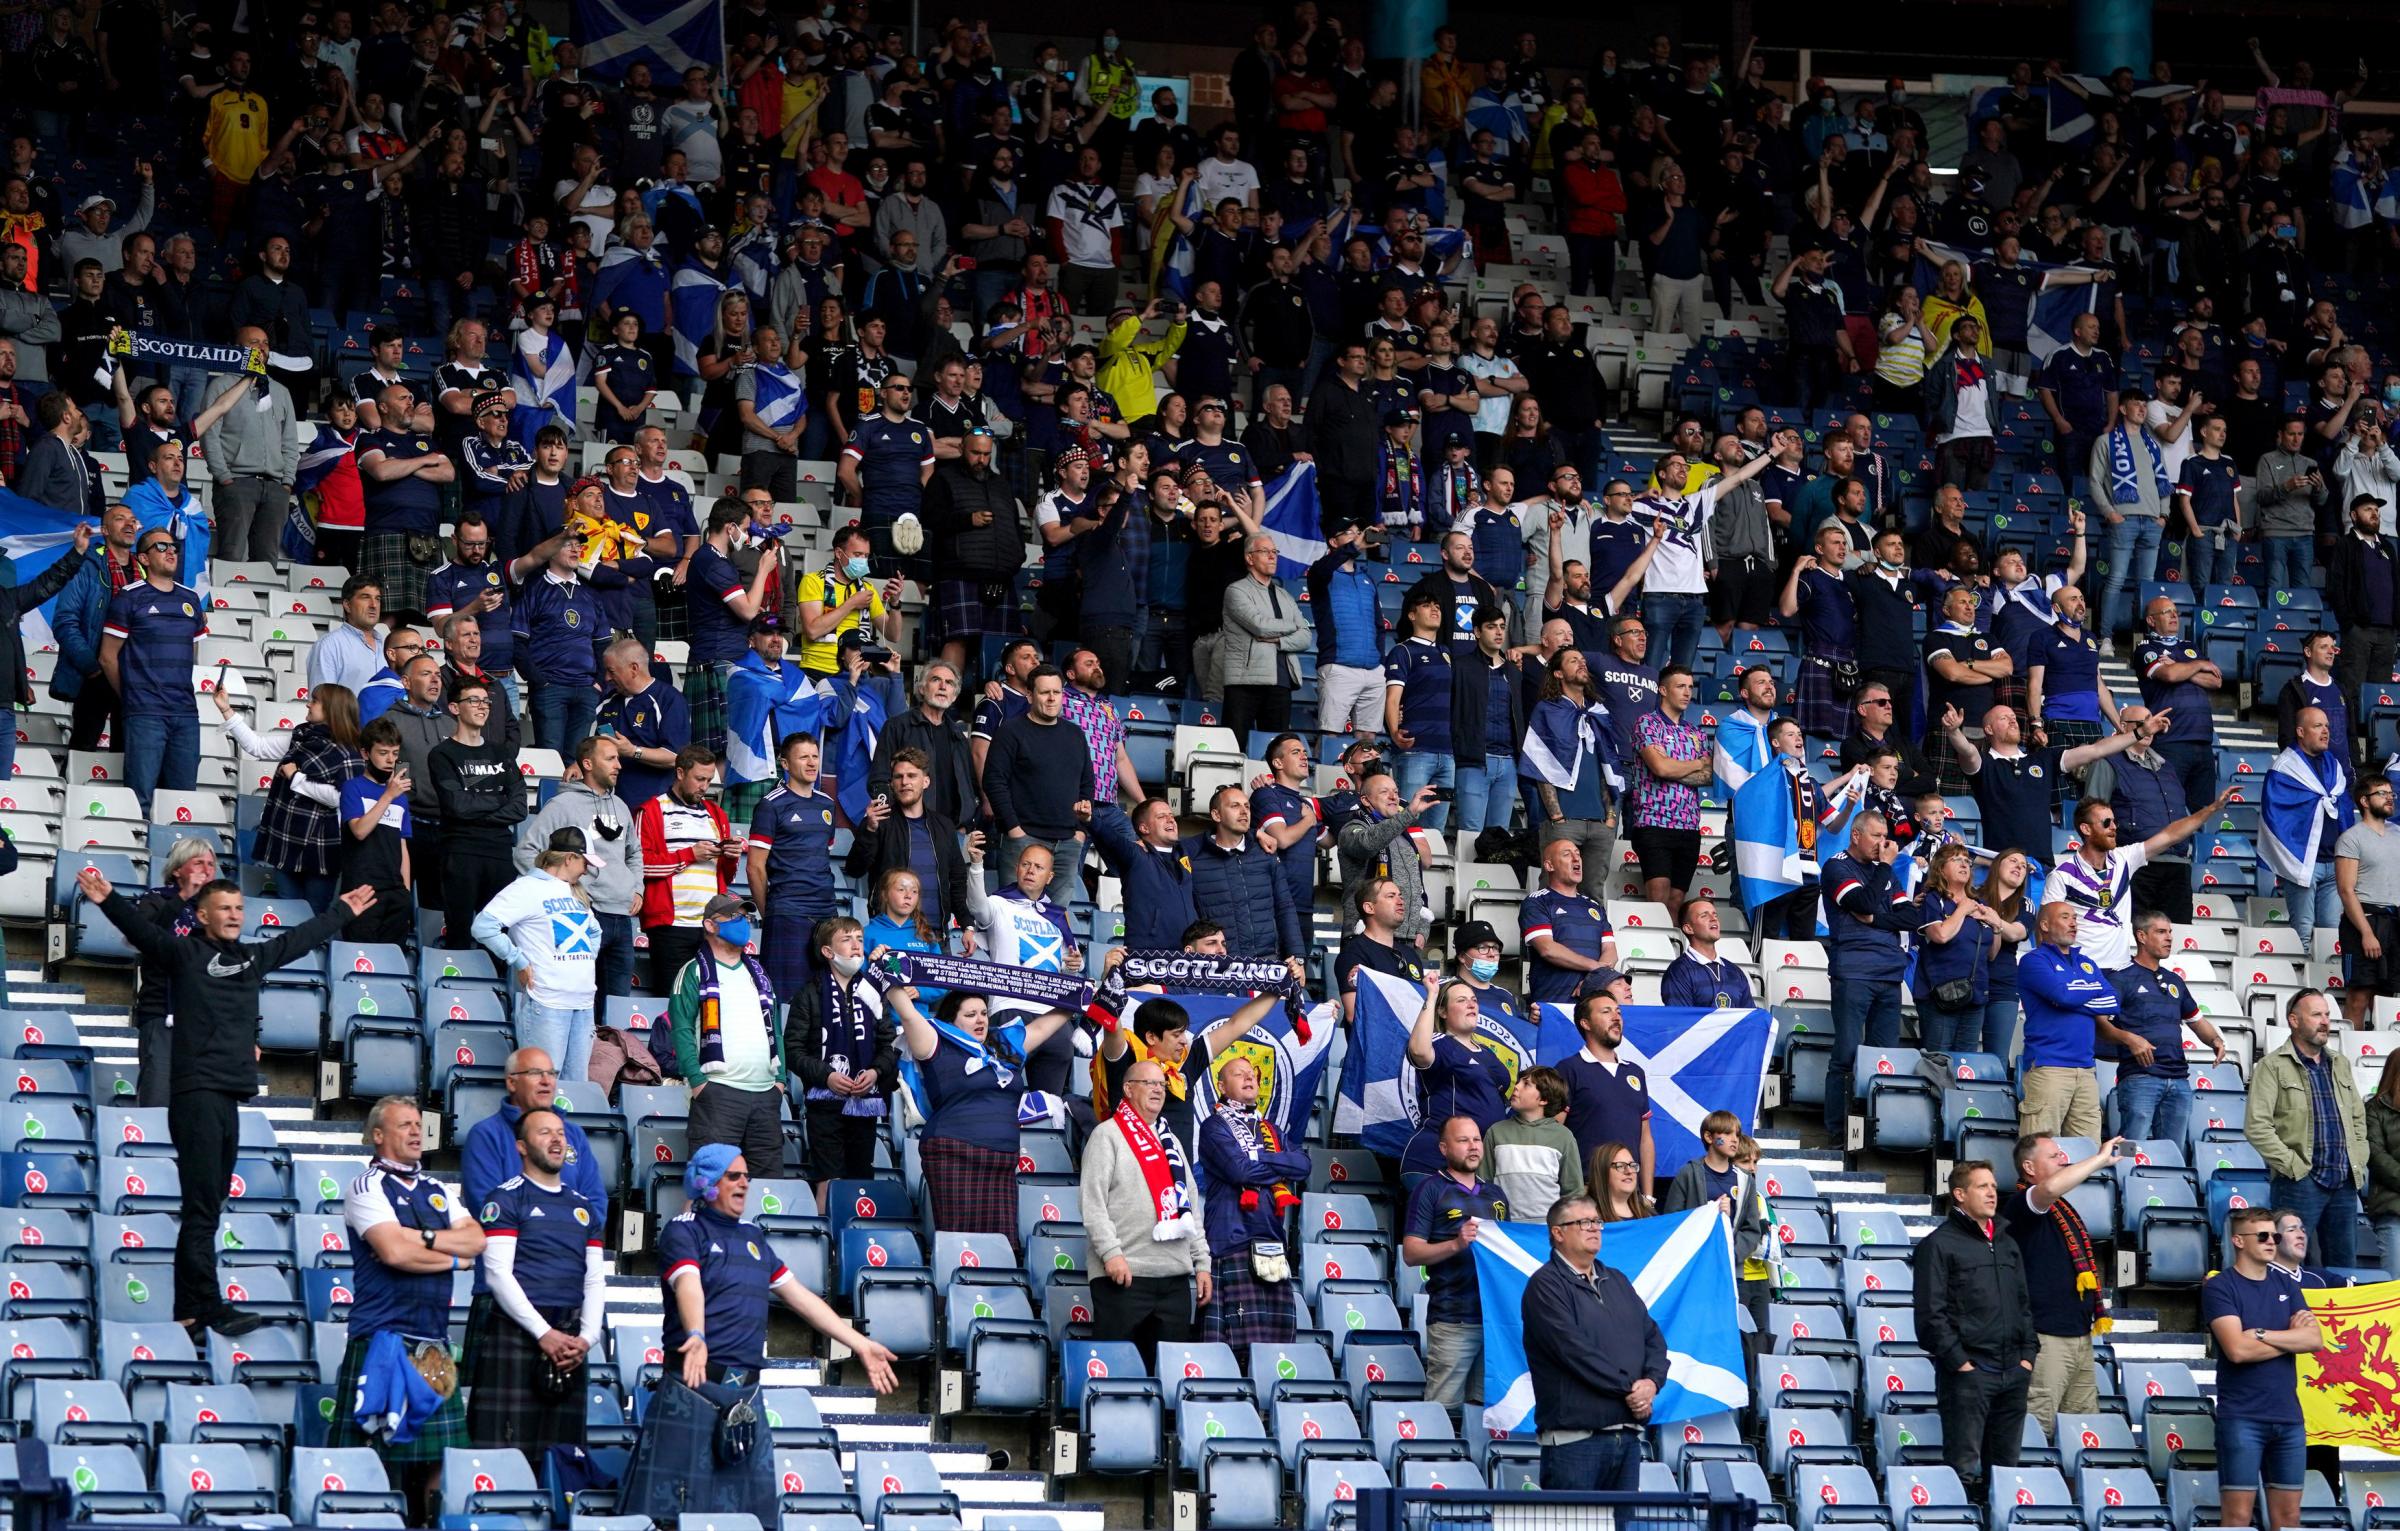 Chris Jack: End of Covid crowd rules is long overdue for Scottish football fans